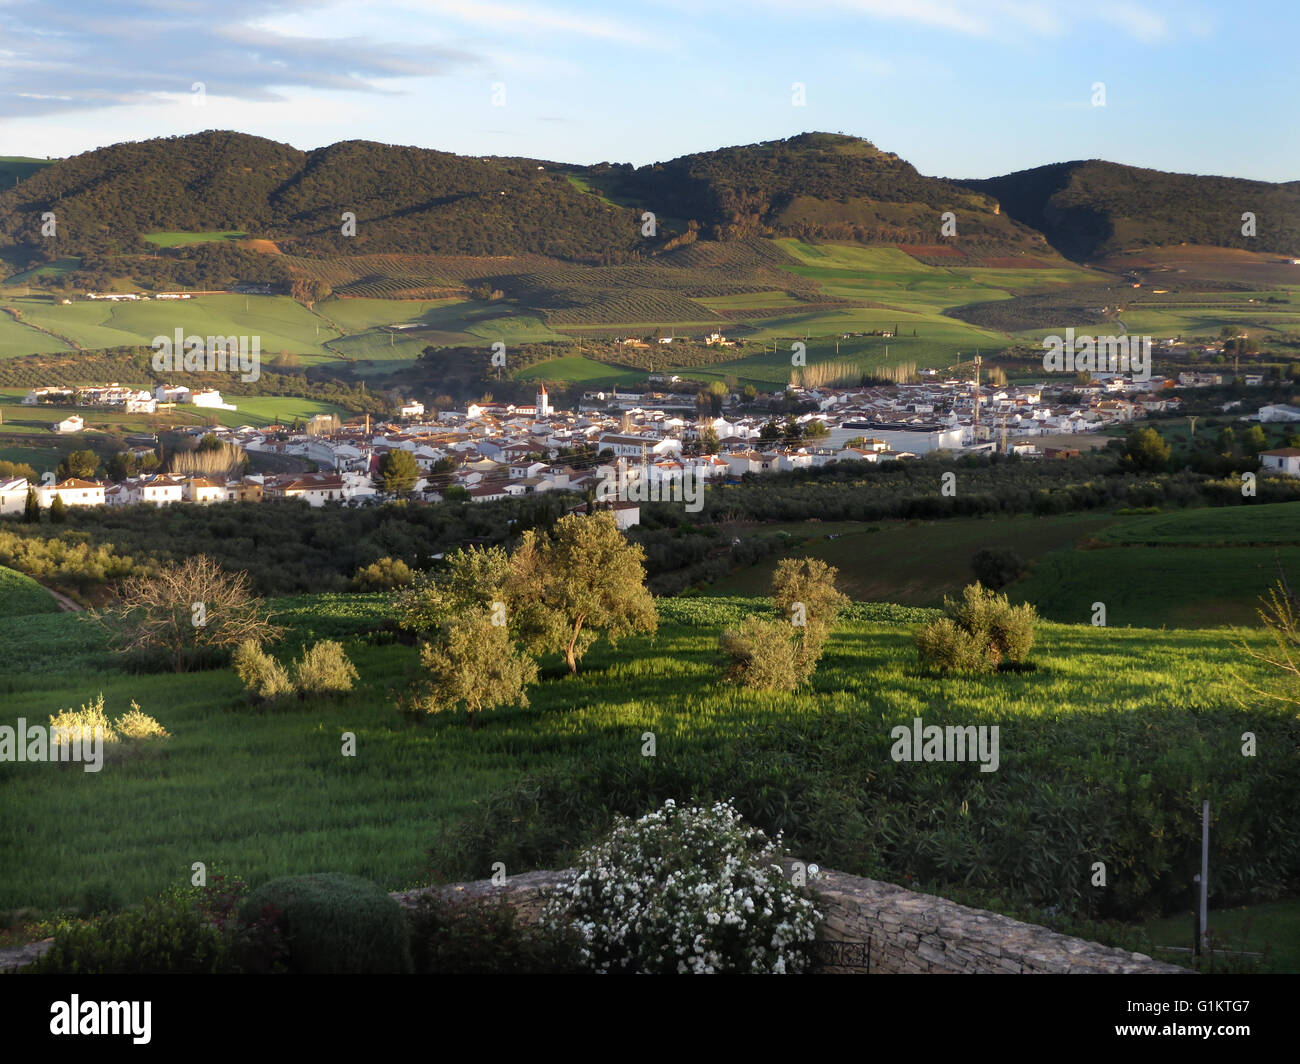 Arriate, a small village in Andalucia Spain Stock Photo